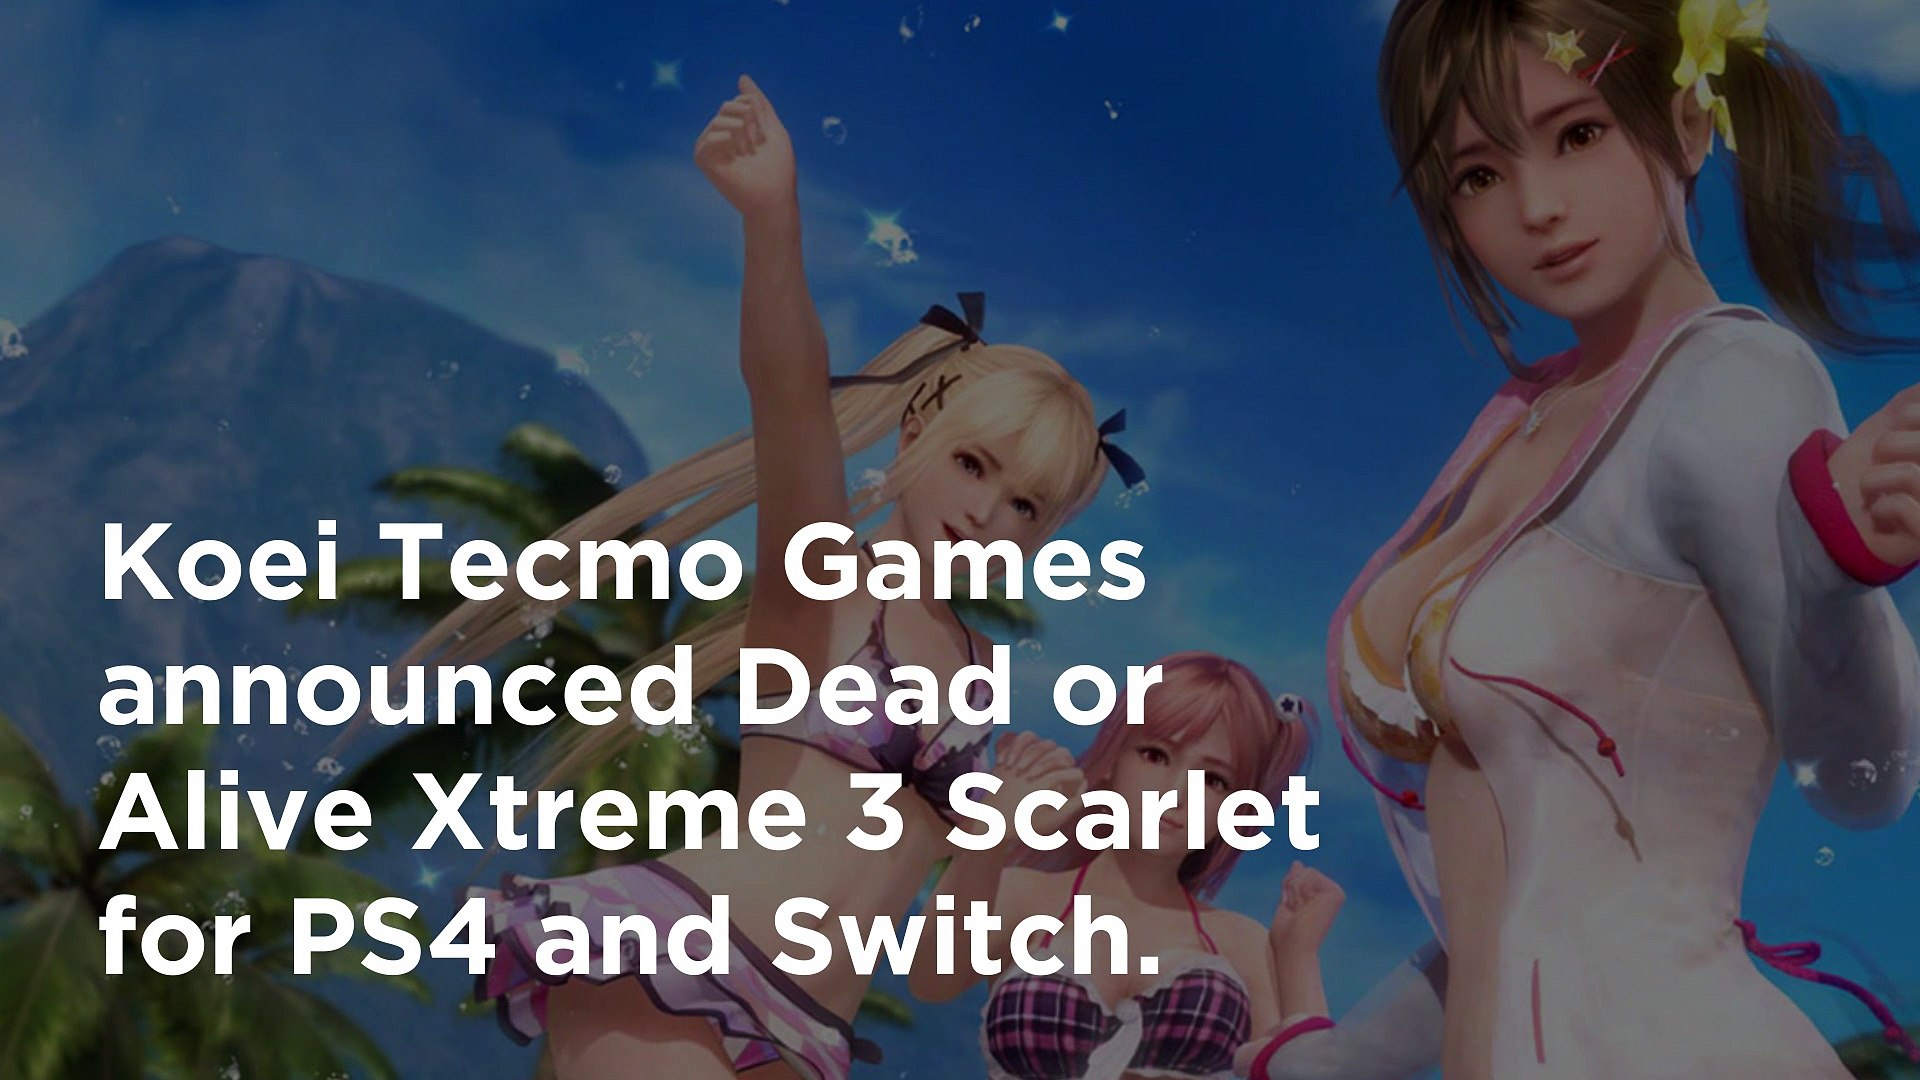 Dead or alive xtreme 3 scarlet switch